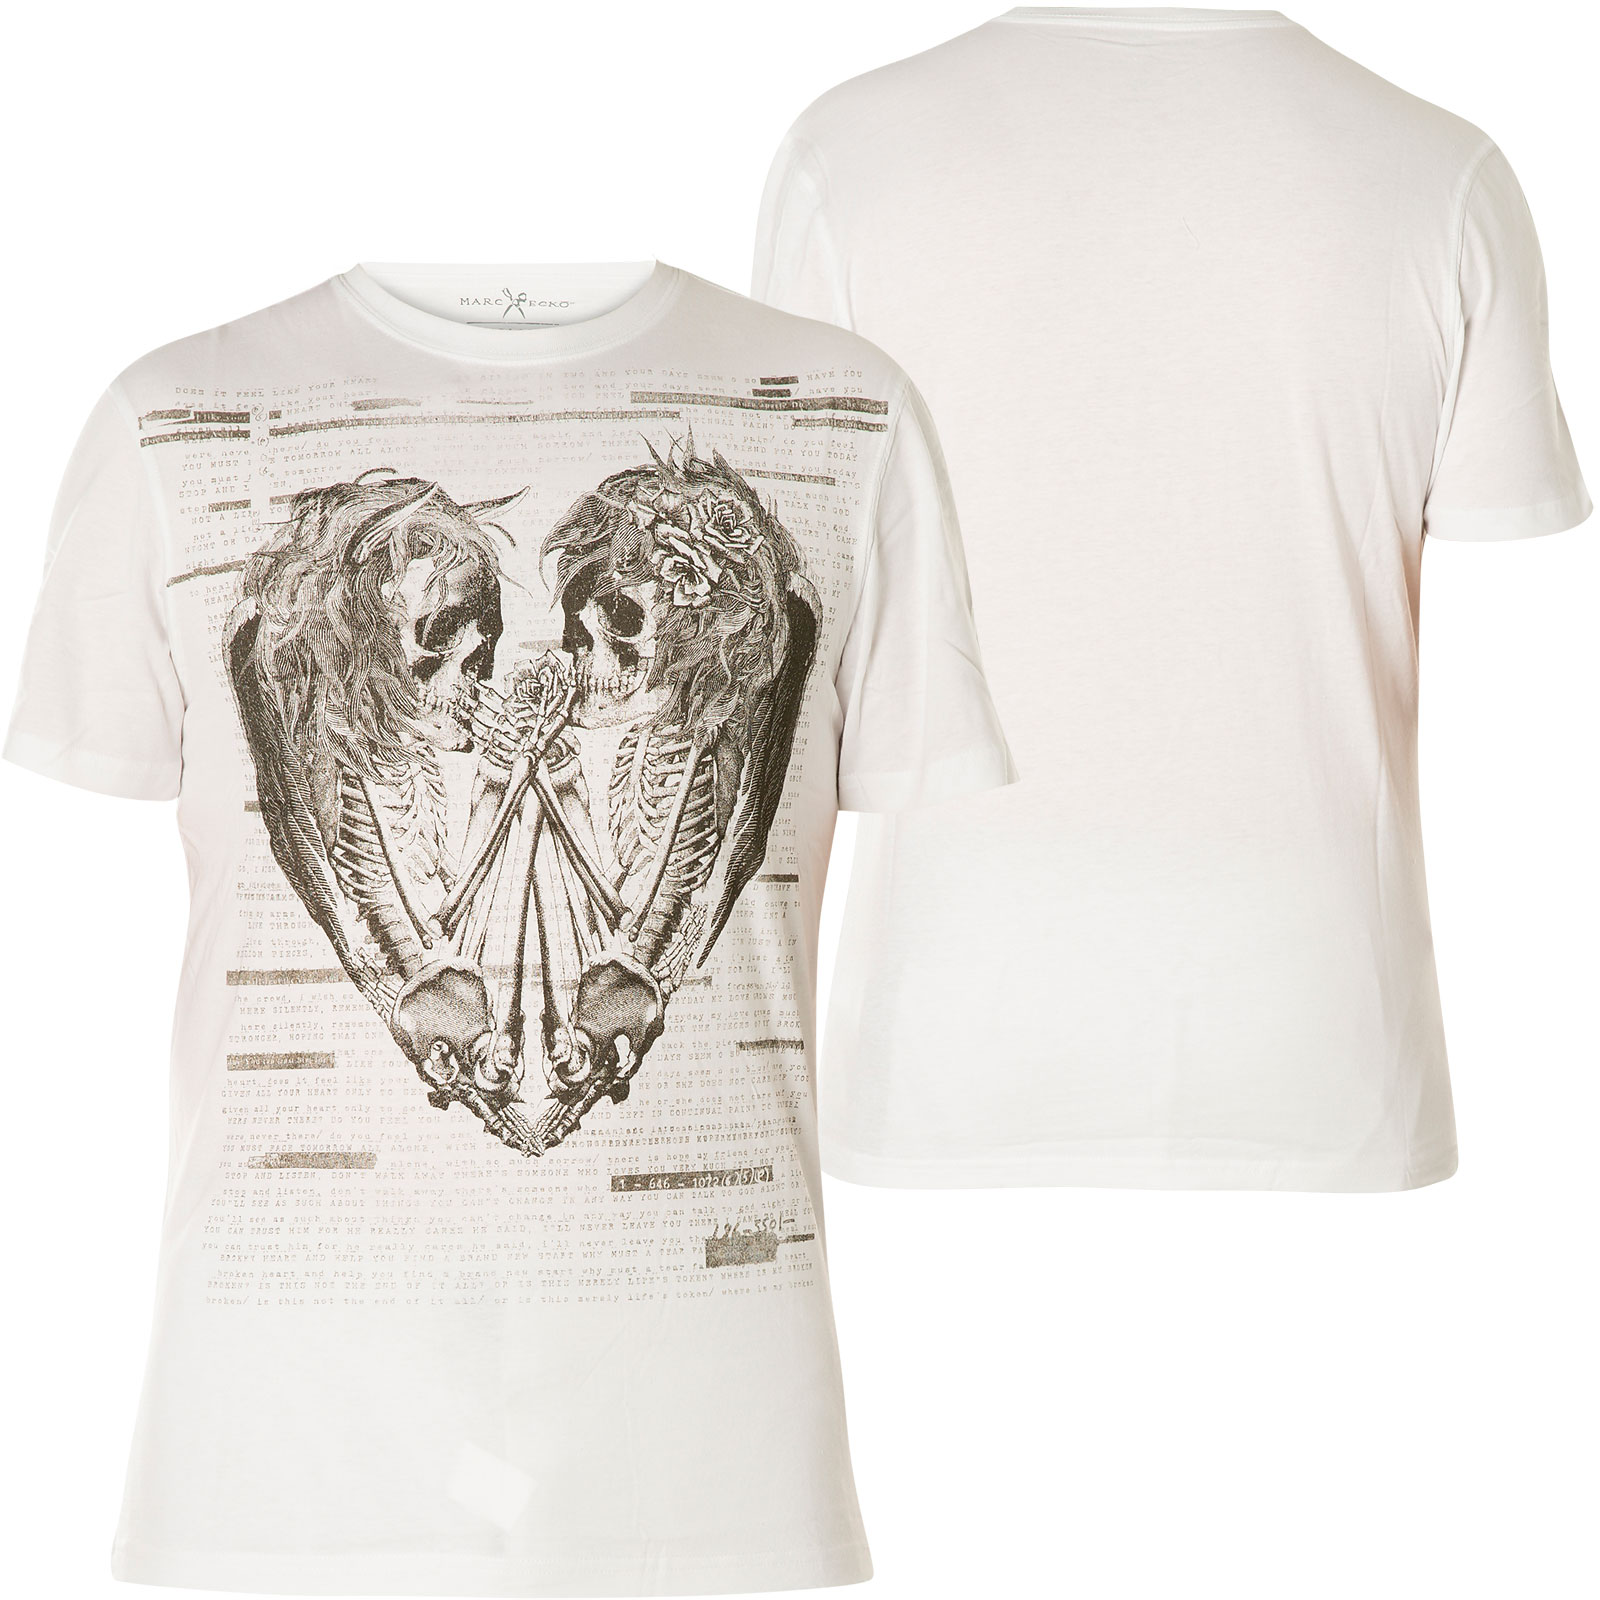 Marc Ecko T-Shirt Love Kills Print with skeletons in a heart shape